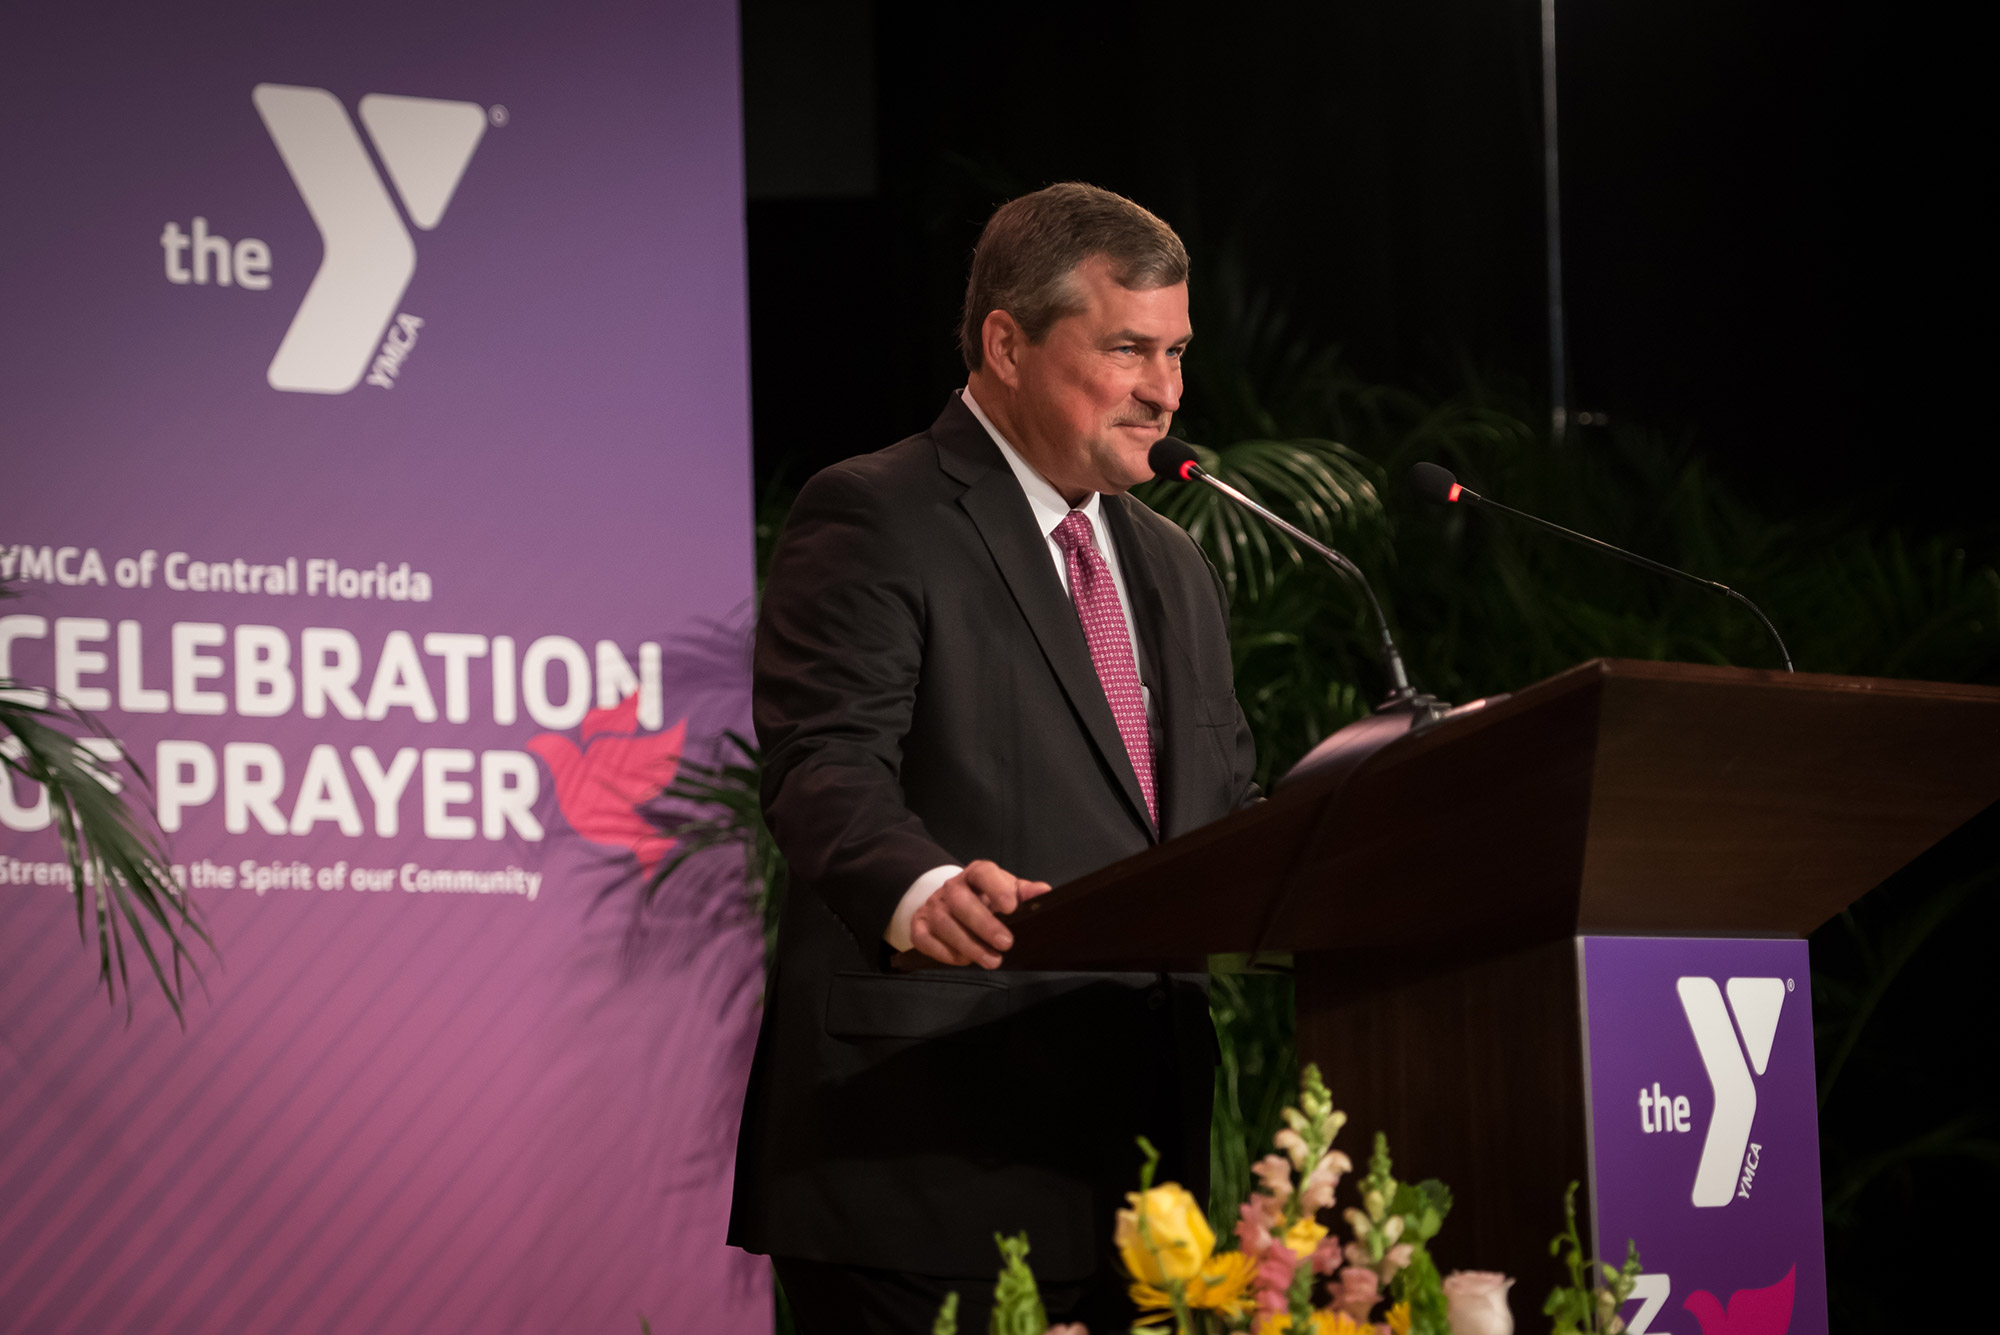 YMCA of Central Florida President and CEO Dan Wilcox at lectern for the Celebration of Prayer